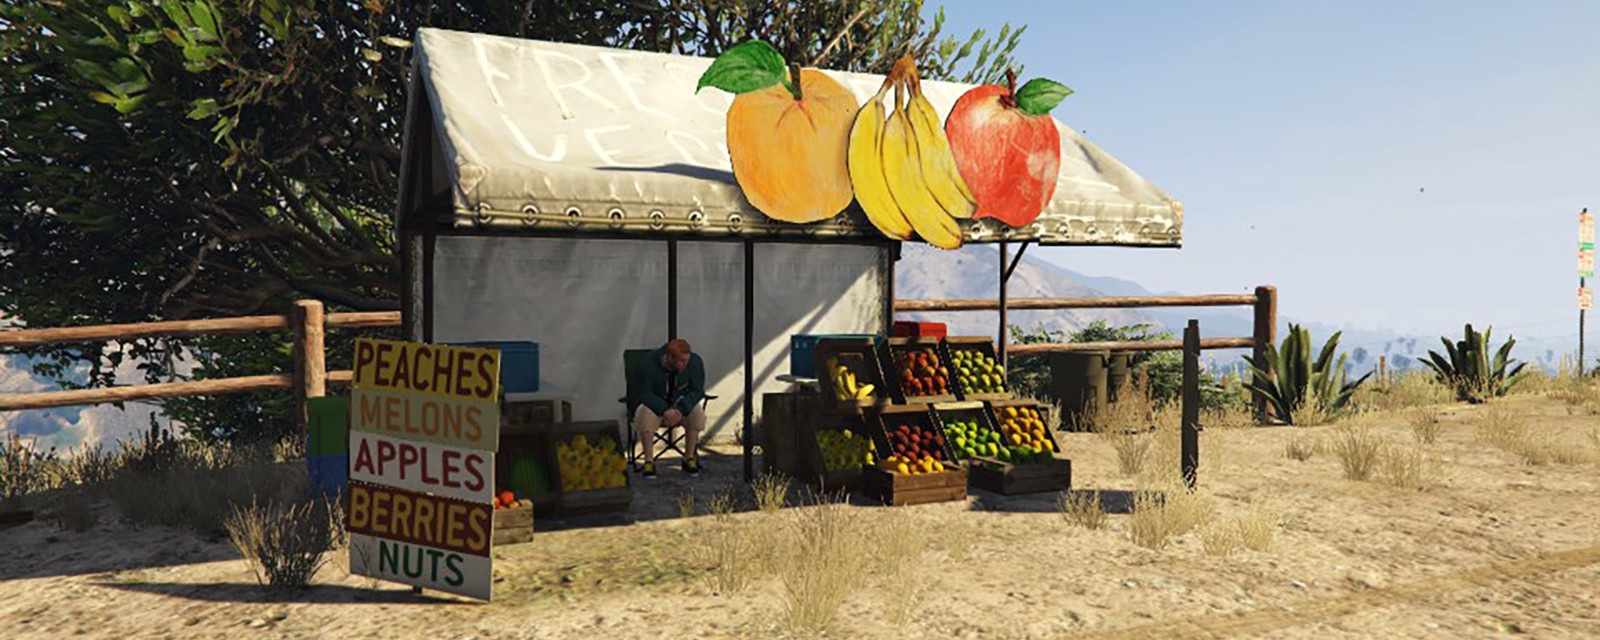 An in-game scene of a roadside market stall selling fruit.